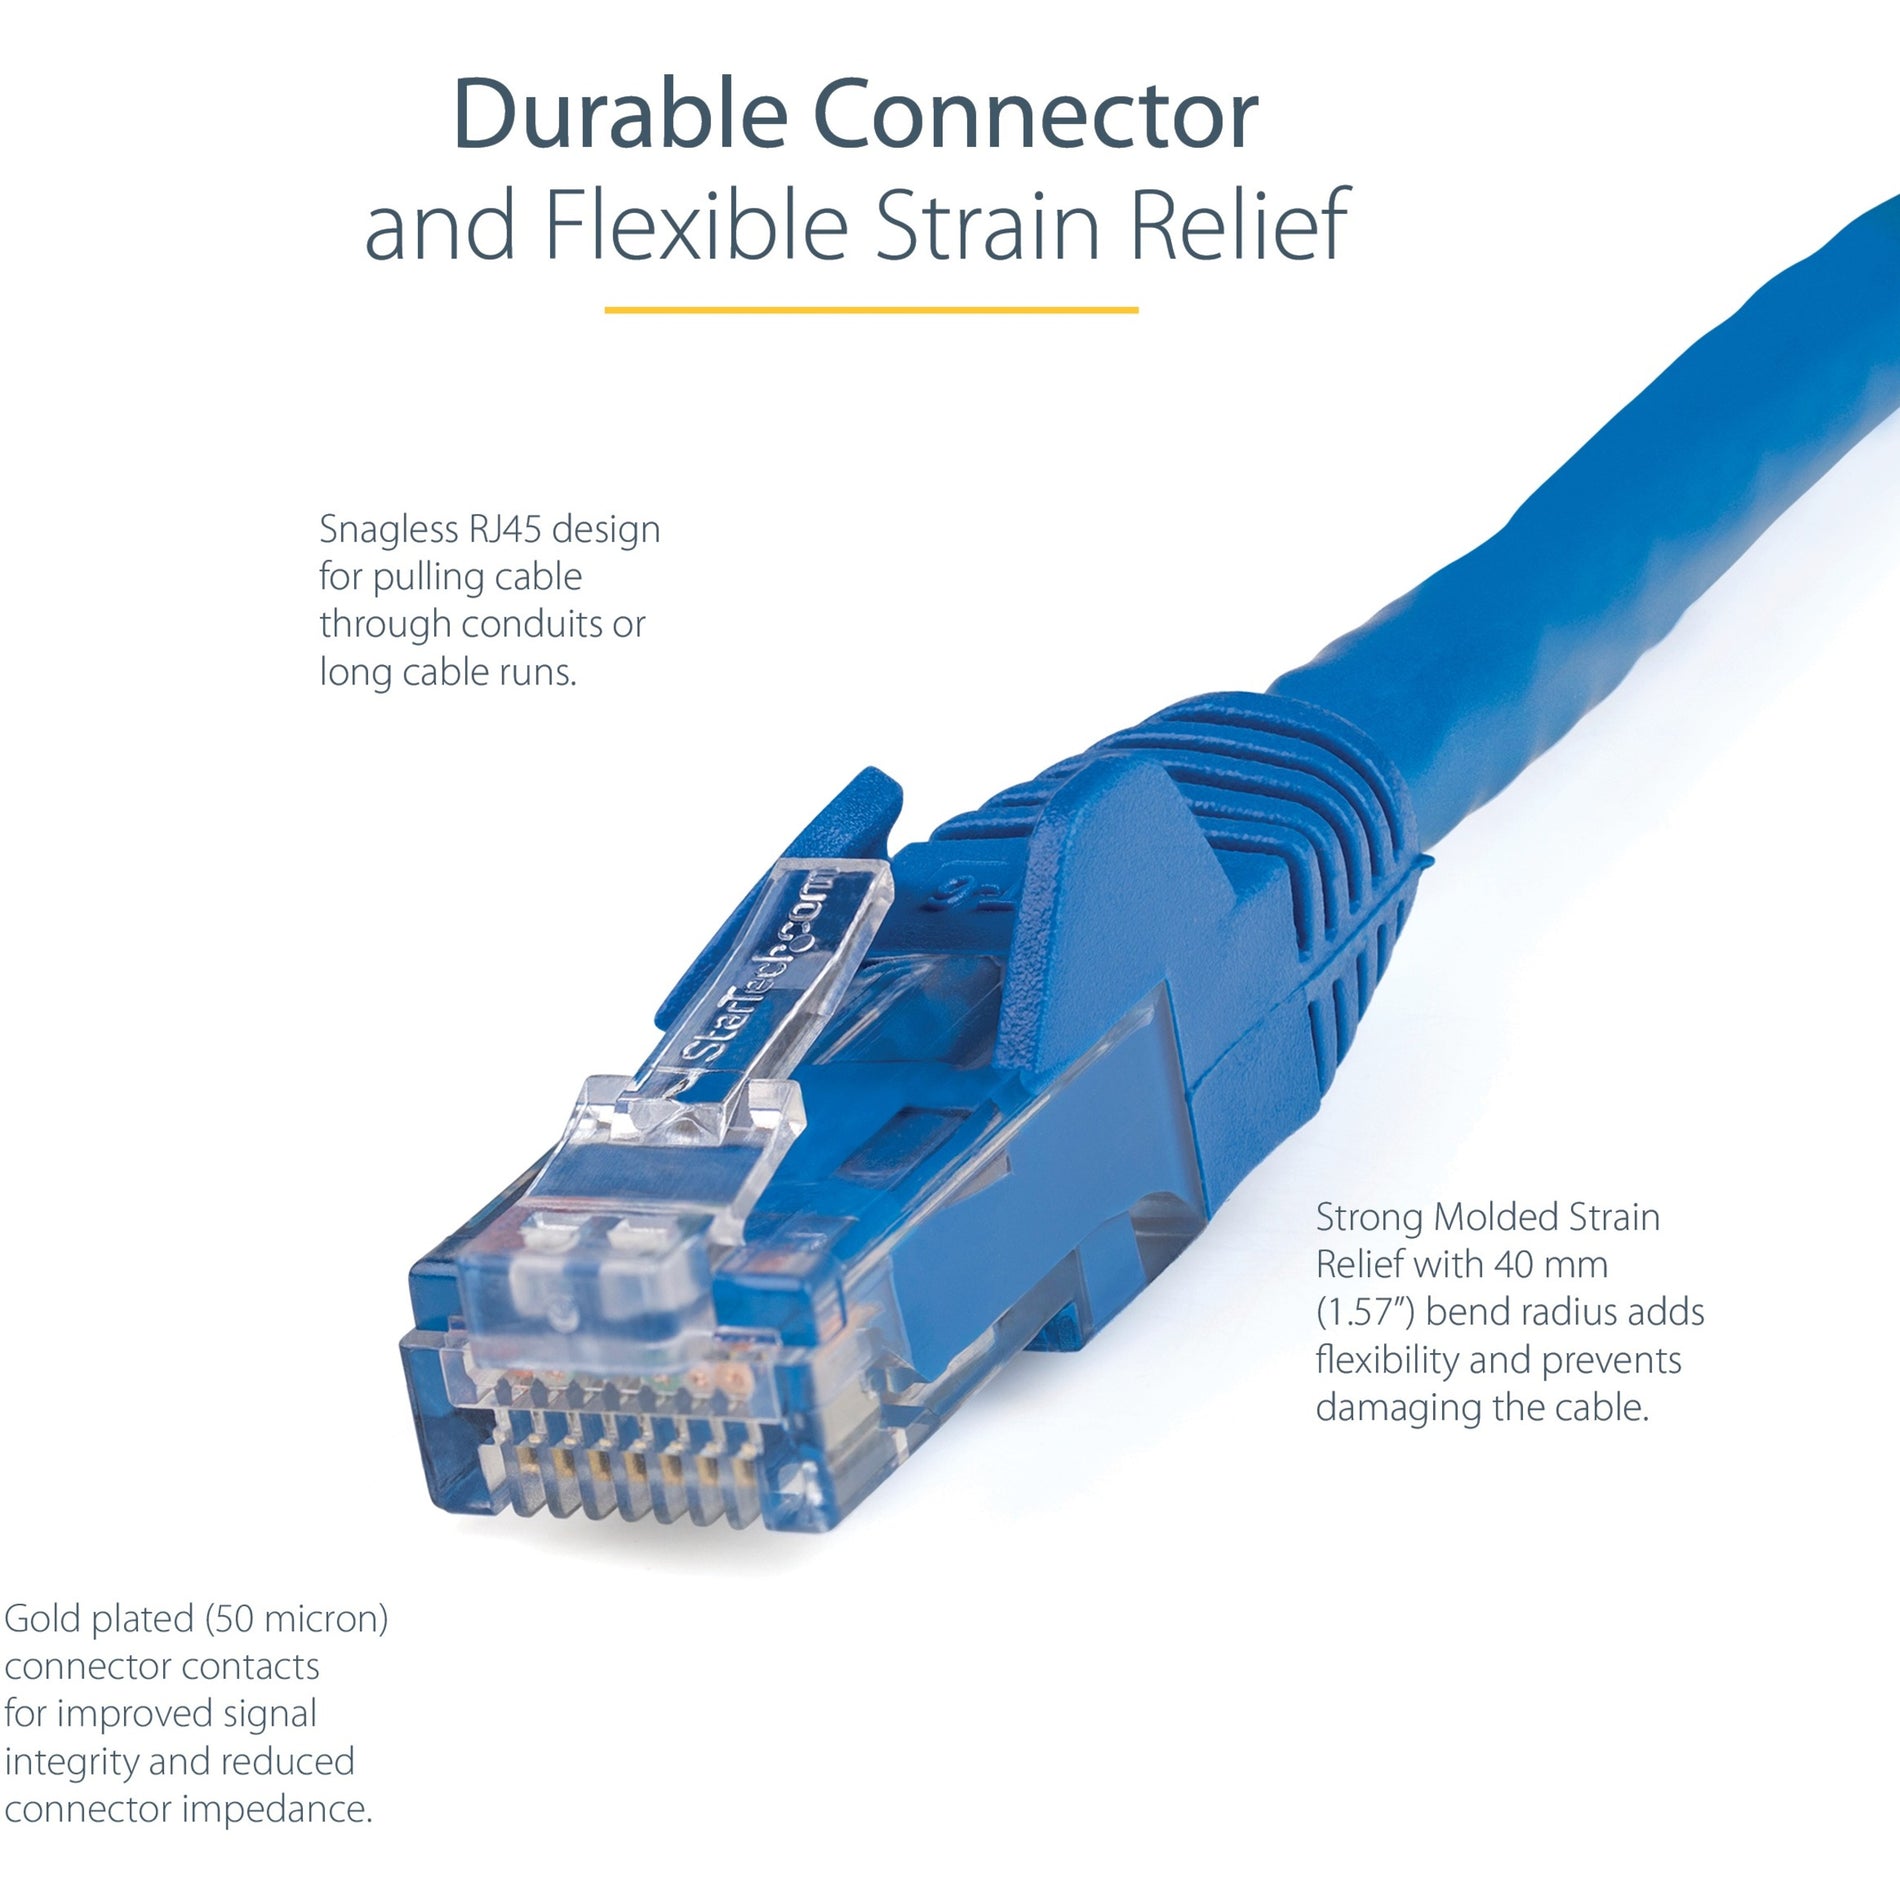 StarTech.com N6PATCH35BL 35 ft Blue Snagless Cat6 UTP Patch Cable, 10 Gbit/s Data Transfer Rate, Gold Plated Connectors